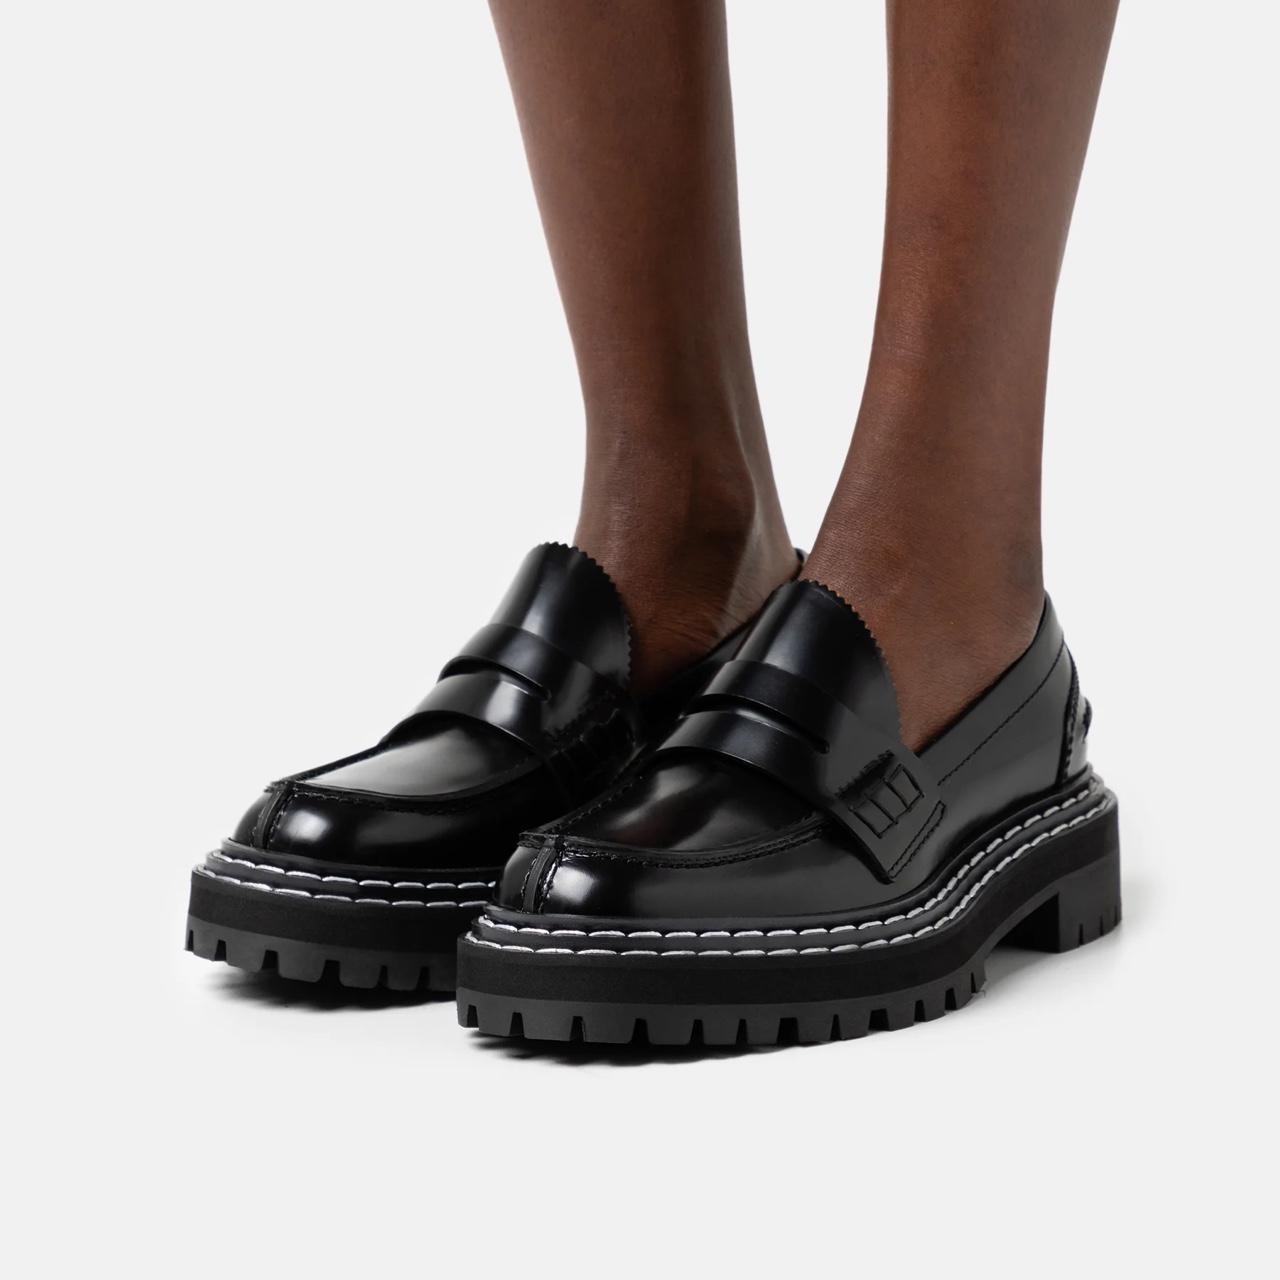 square-toe loafers